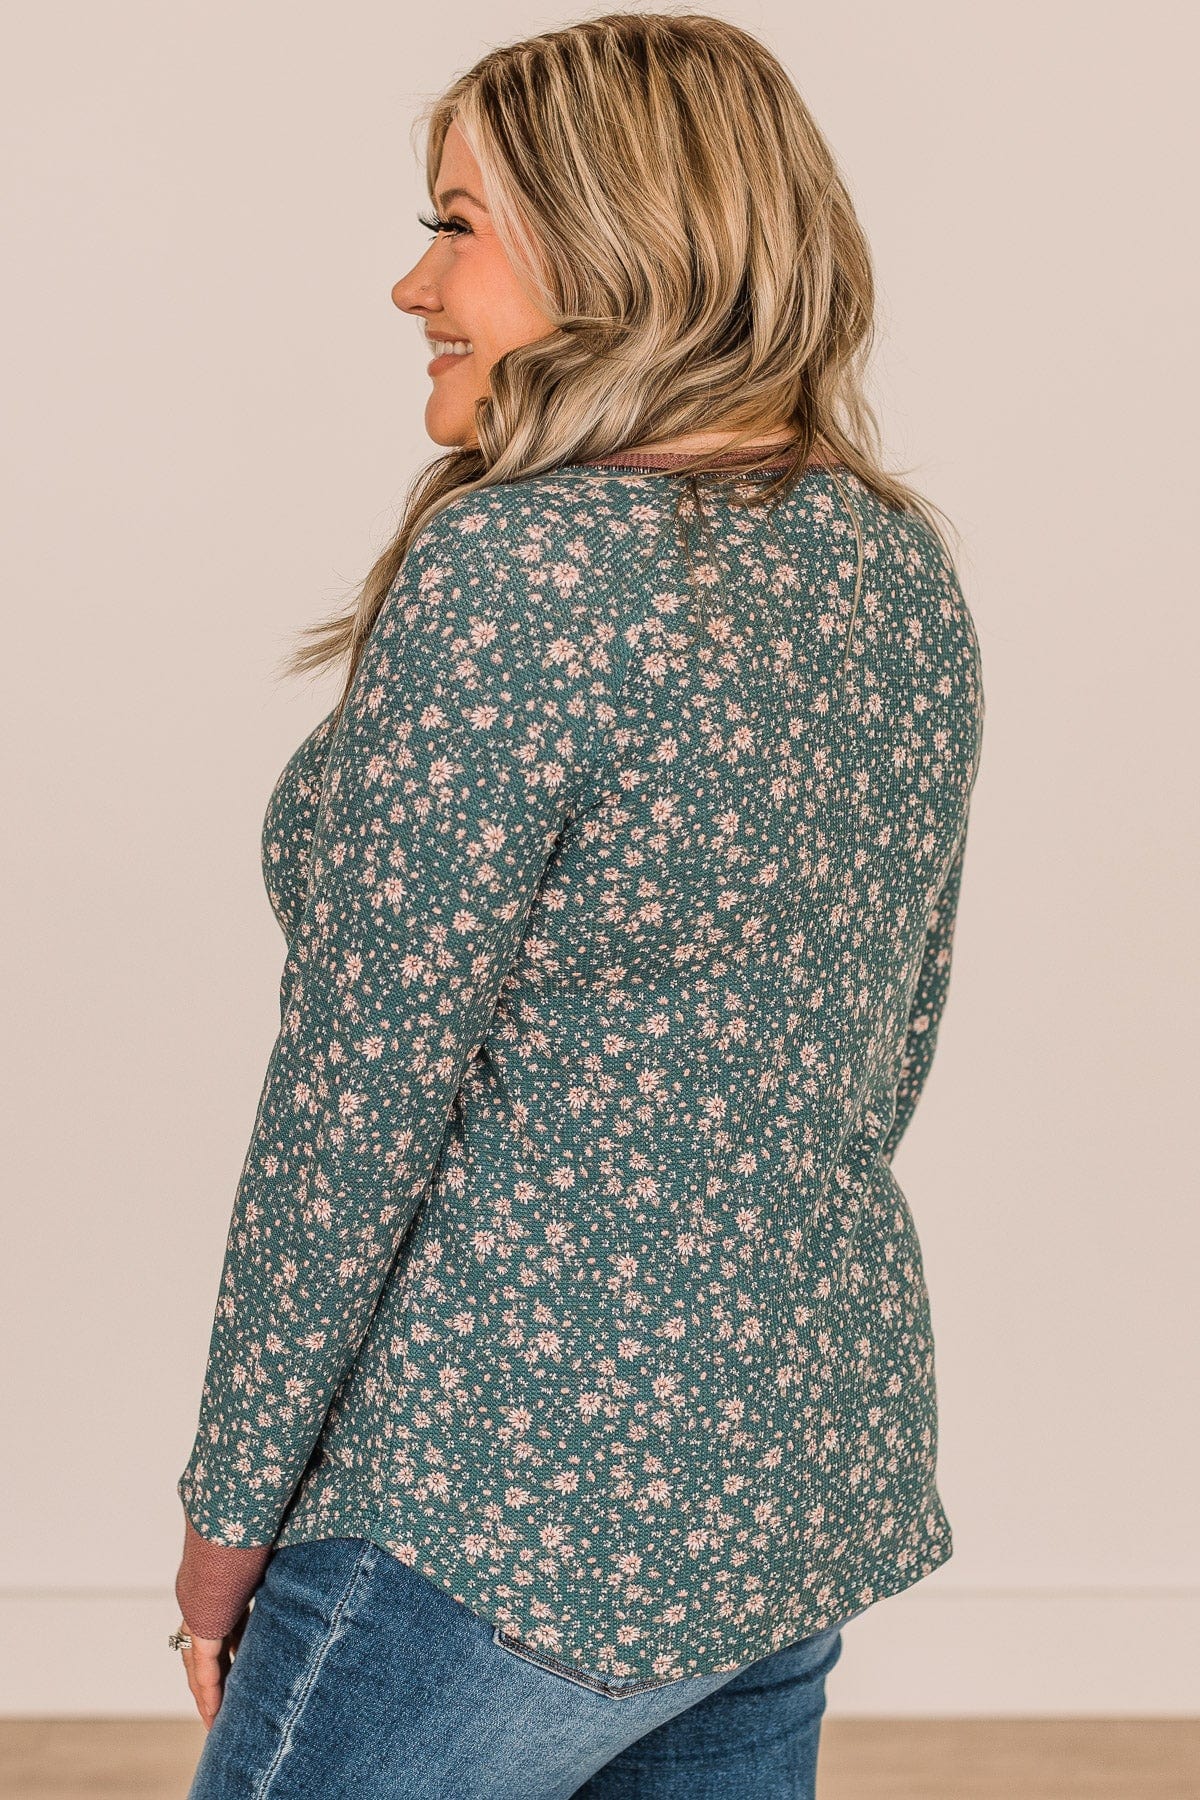 Making It Work Floral Knit Top- Hunter Green